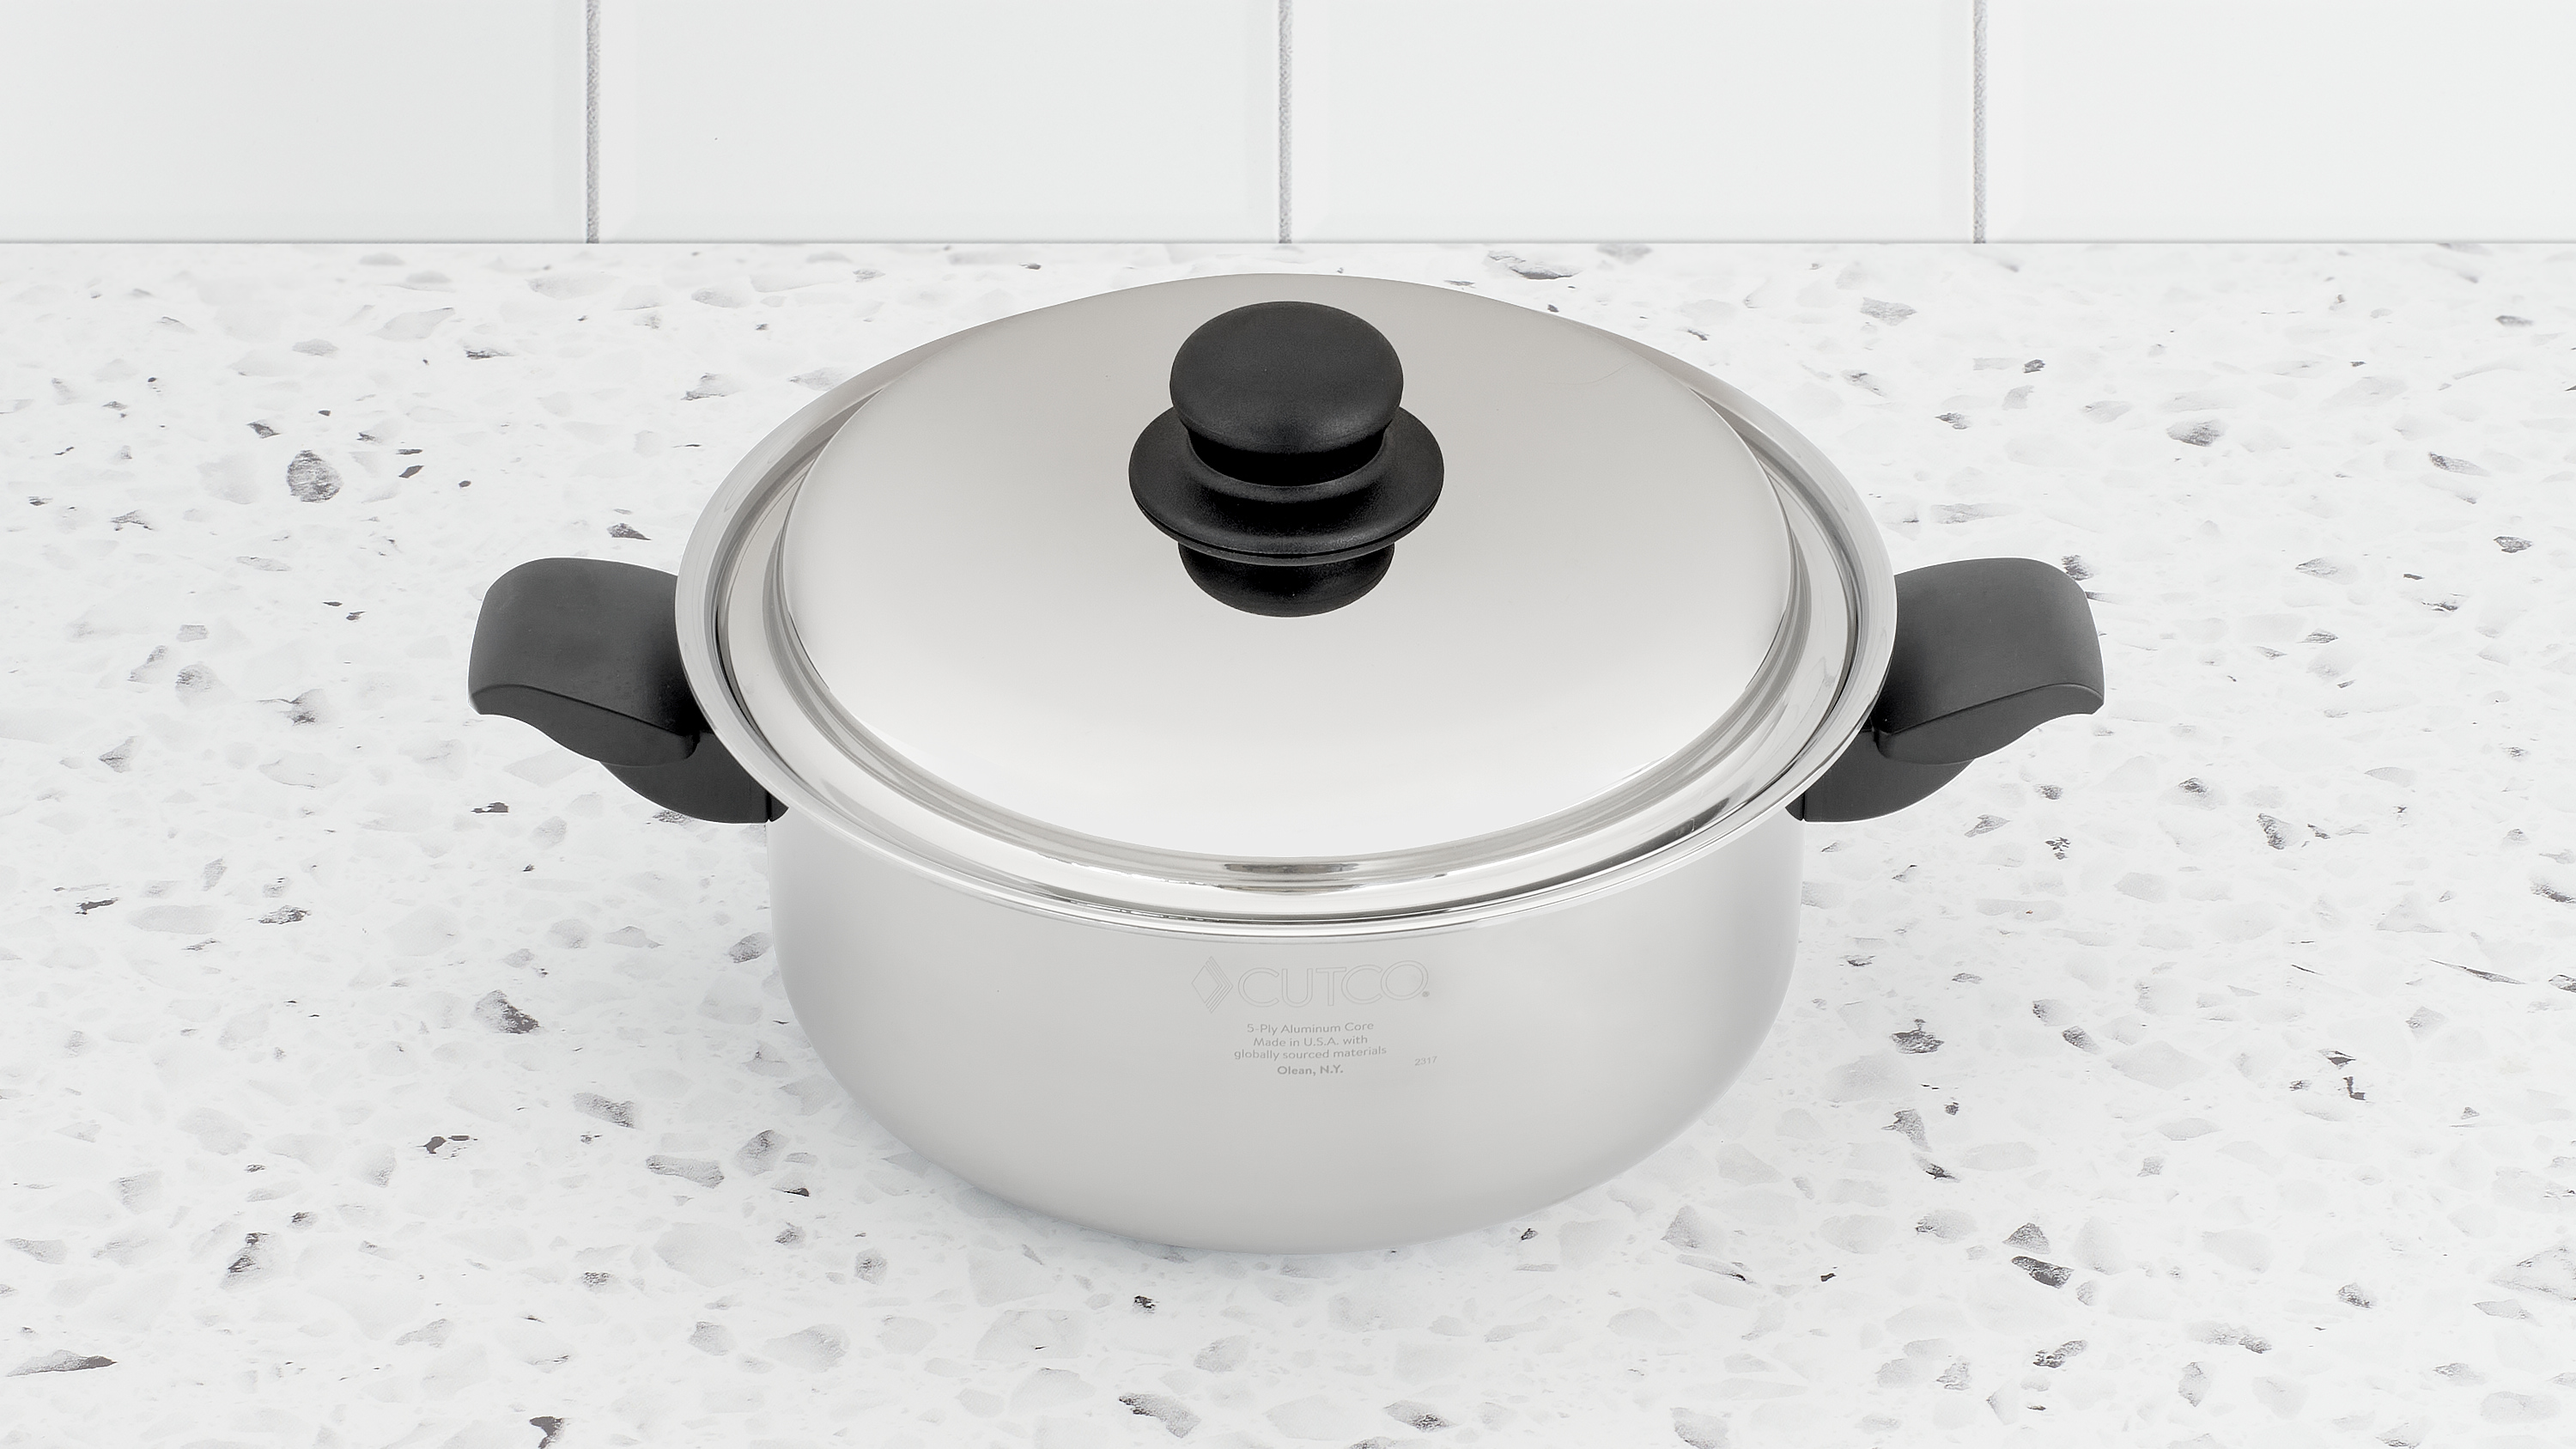 HexClad - The 8-QT Pot in our 6pc Pot Set is the essential soup and stockpot.  Great for a variety of cooking! Have you tried our 6pc Pot Set yet? #hexclad